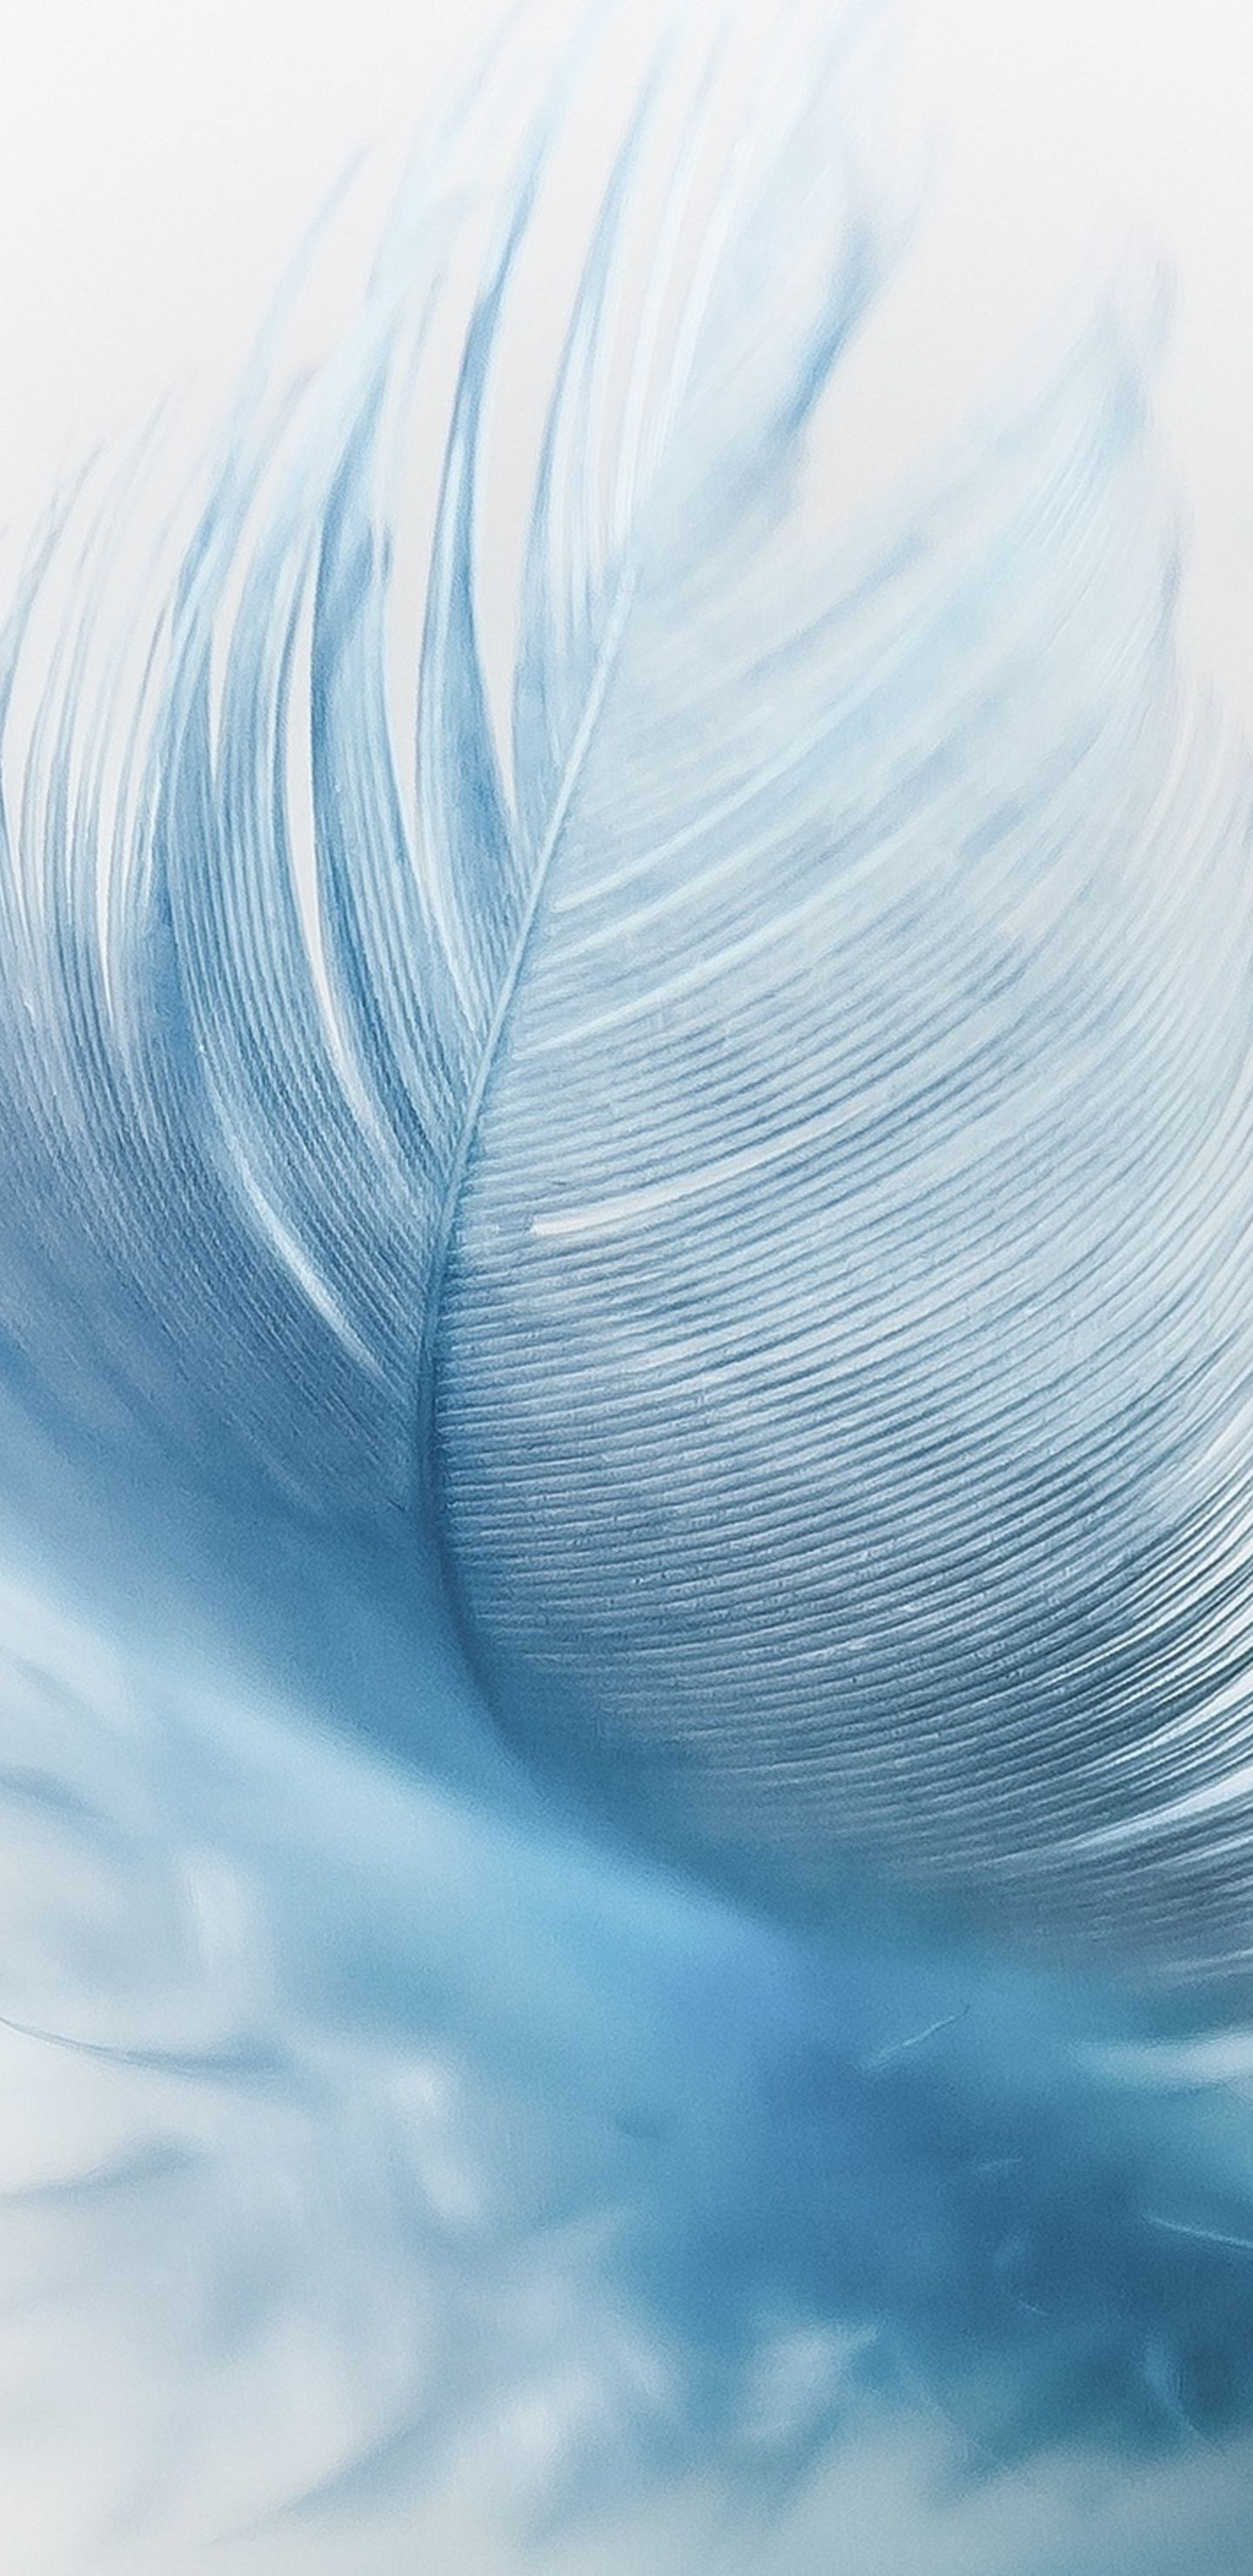 A close up of a feather in blue and white - Feathers